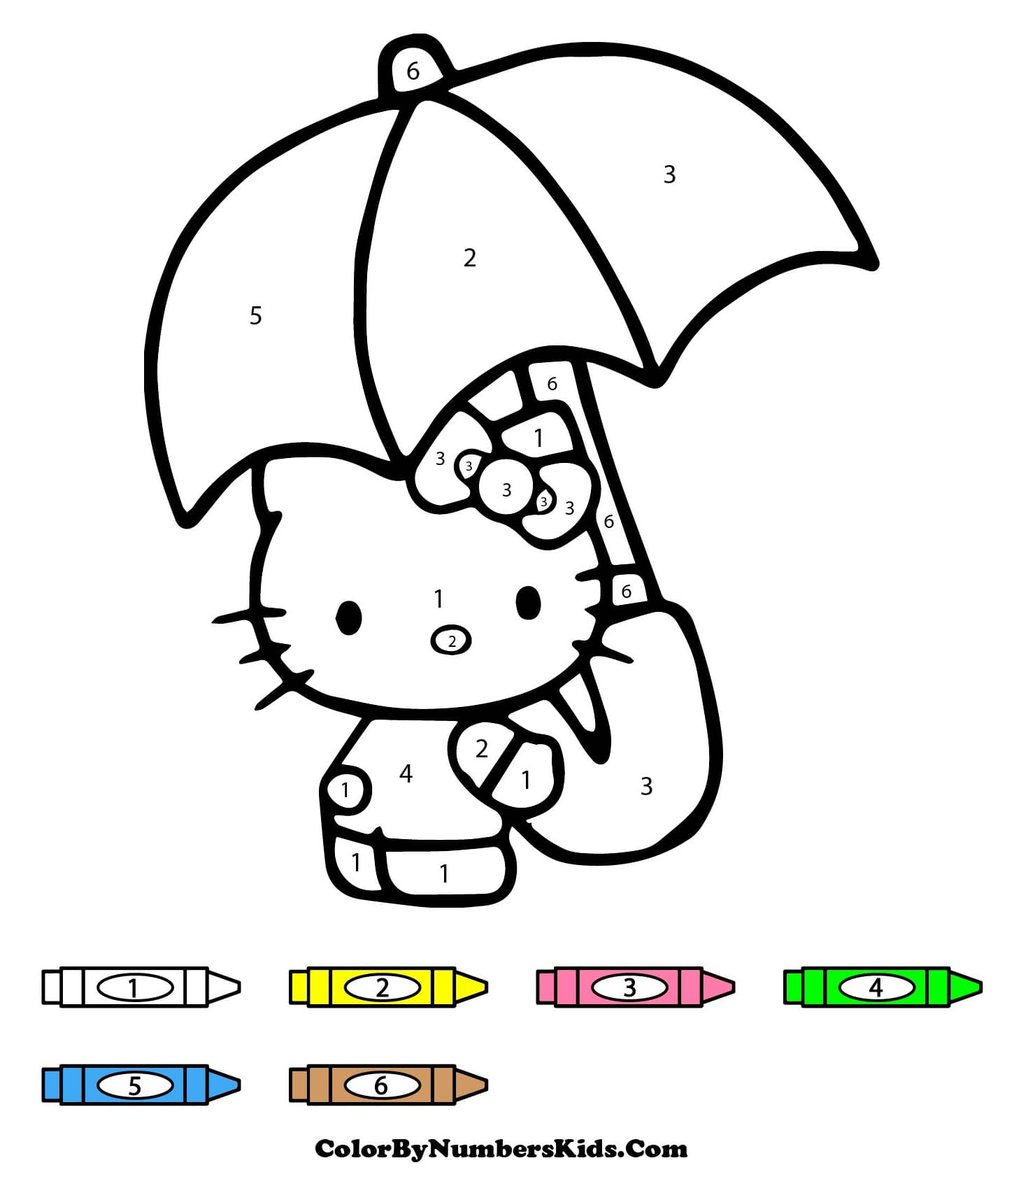 Hello Kitty Color By Number🎀 colorbynumberskids.com/hello-kitty-co… #HelloKitty #colorbynumber #coloringpages #ColoringBook #art #fanart #sketch #drawing #draw #coloring #USA #trend #Trending #TrendingNow #Twitter #TwitterX